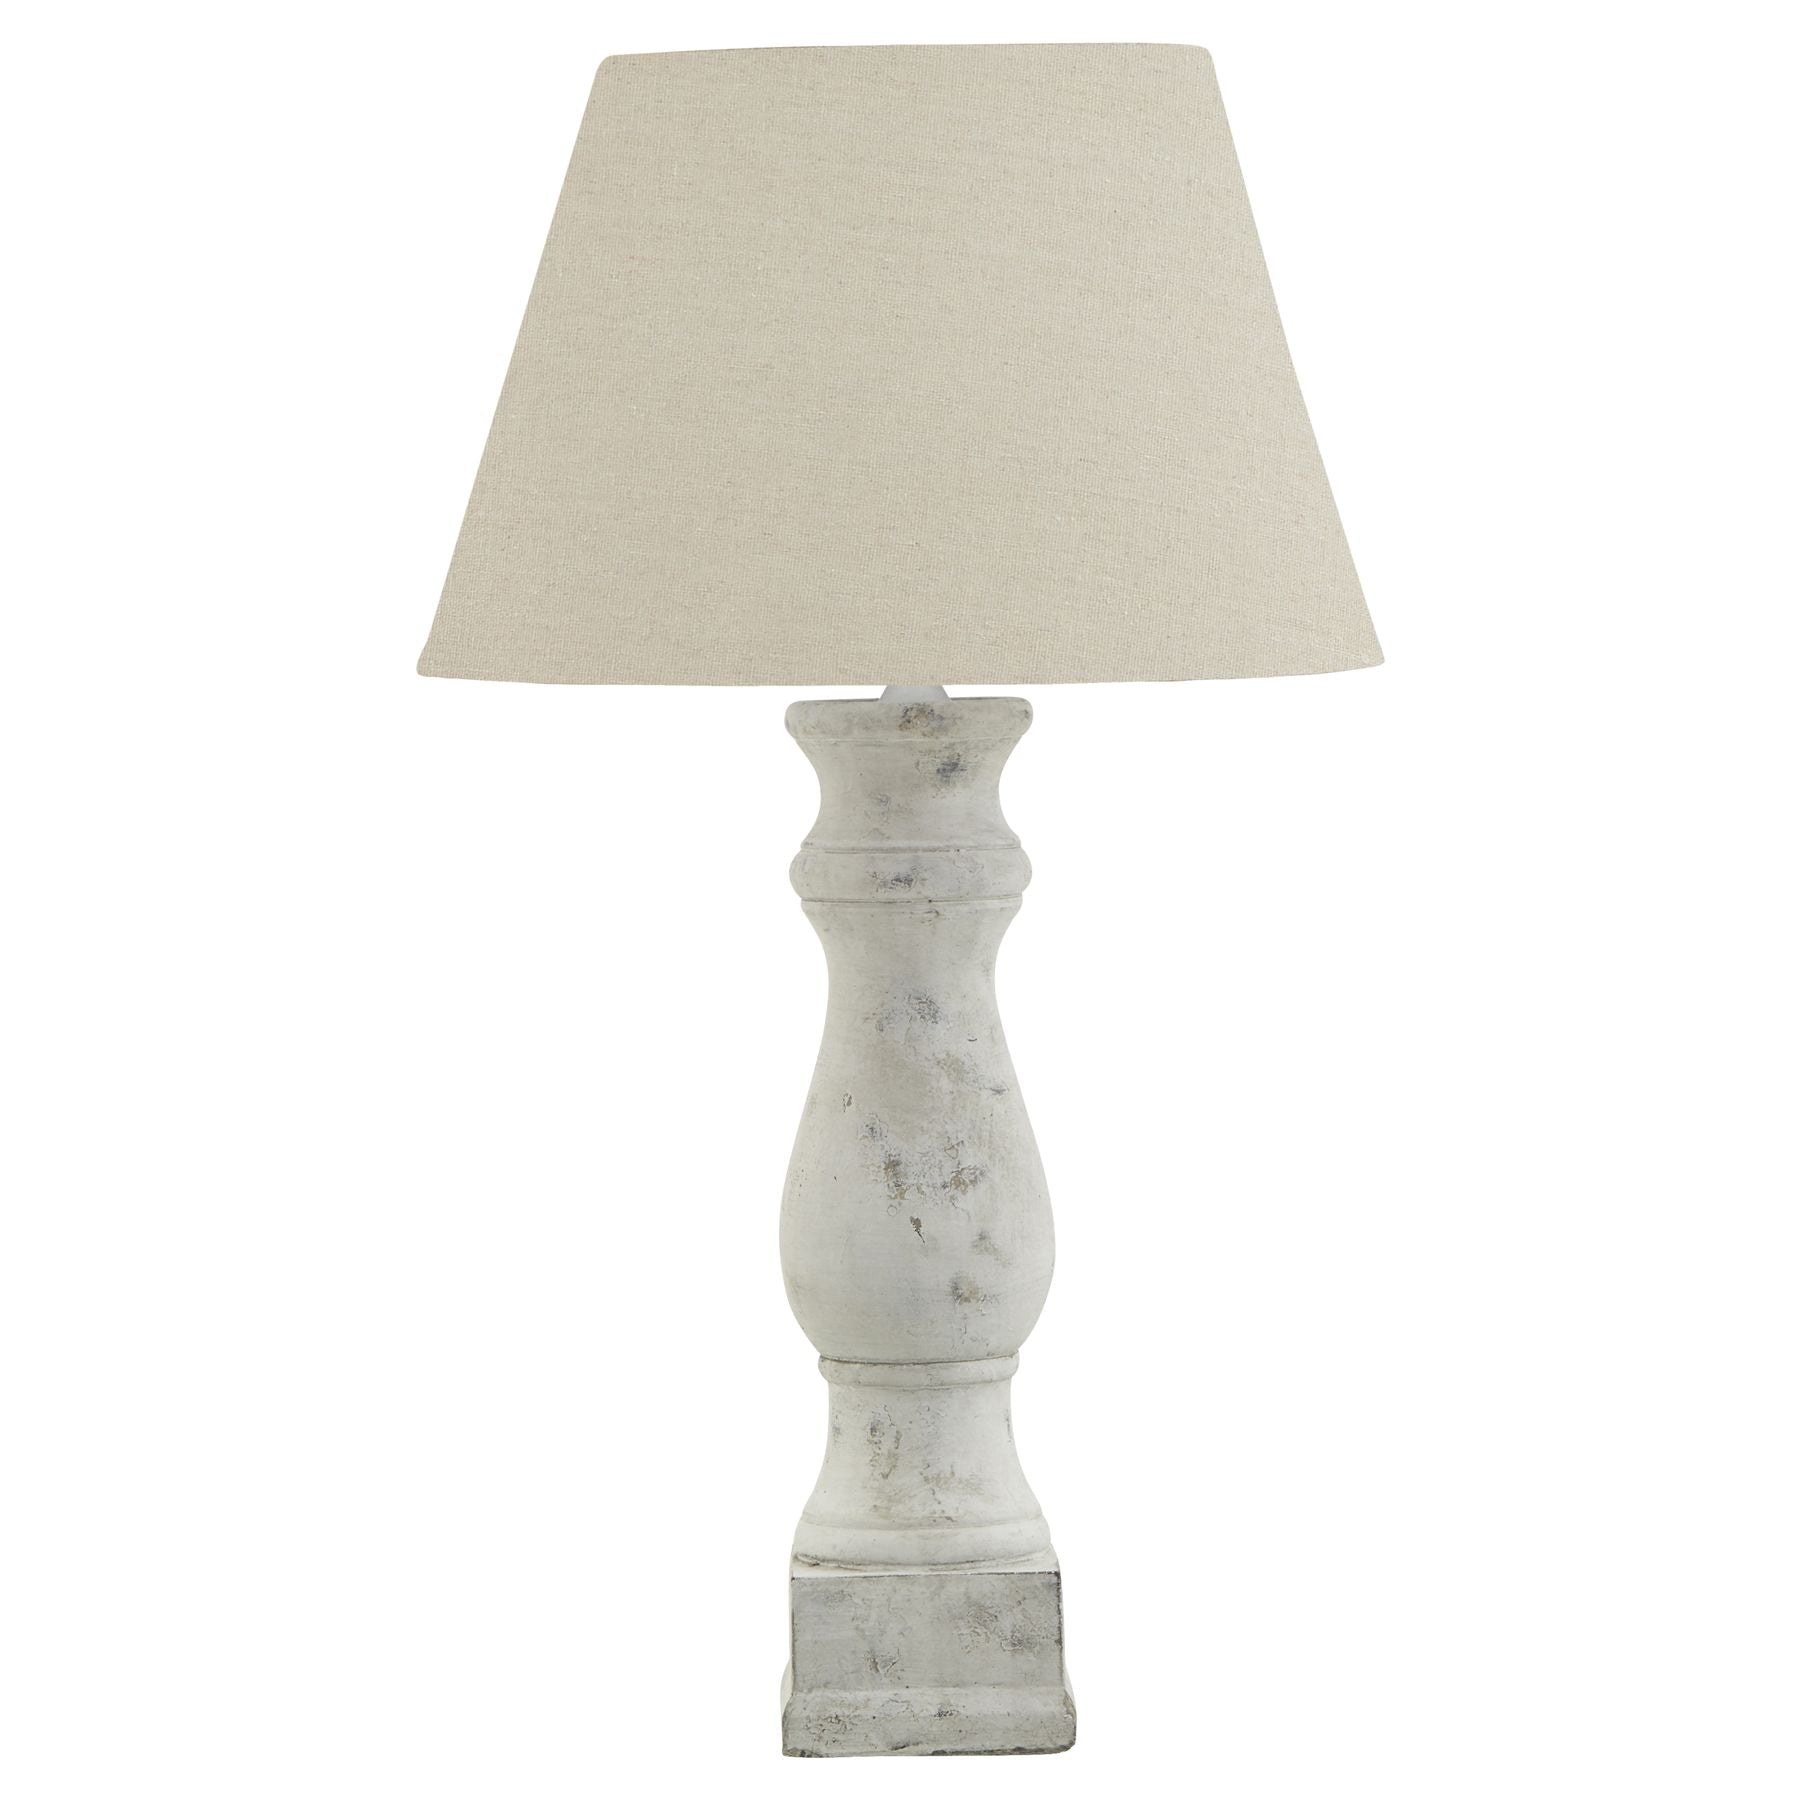 View Darcy Antique White Candlestick Table Lamp With Linen Shade information